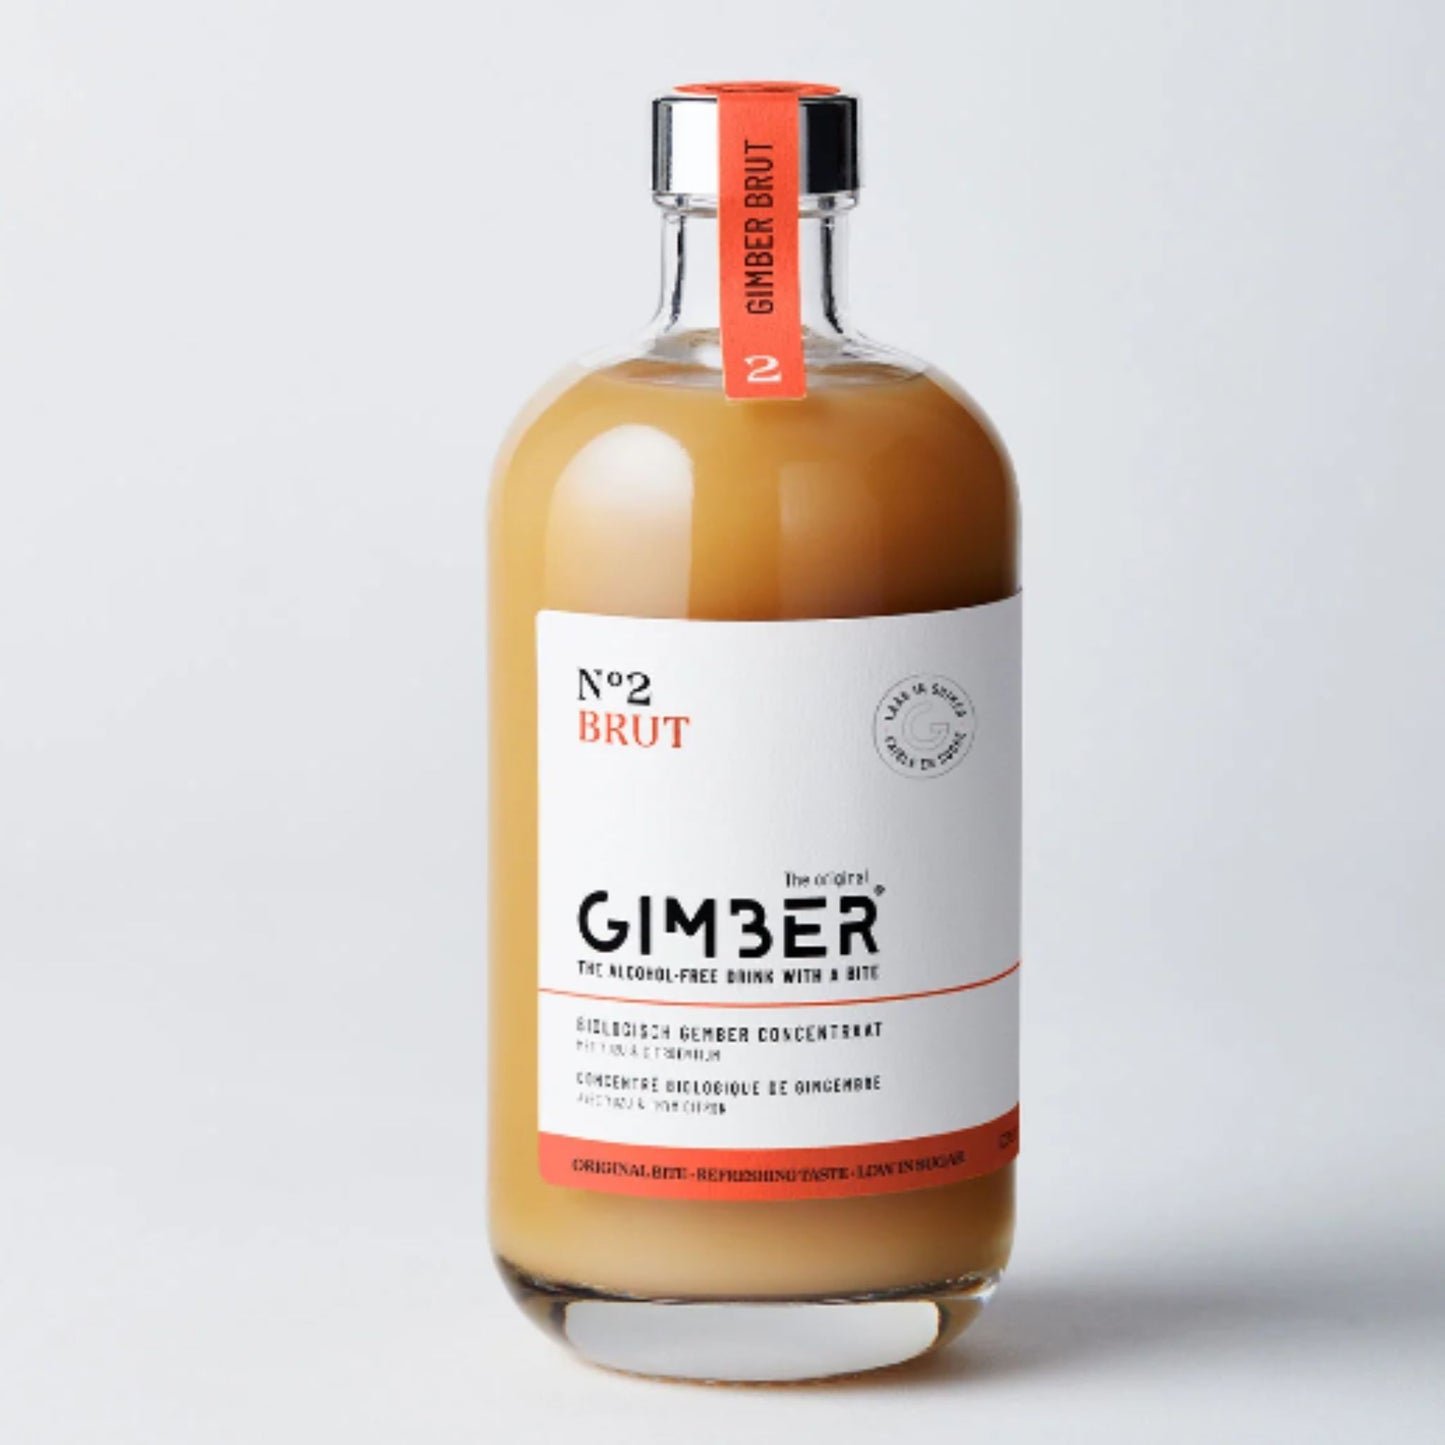 GIMBER No. 2 BRUT. Gimber is available for sale at Knyota Drinks from knyota.com.